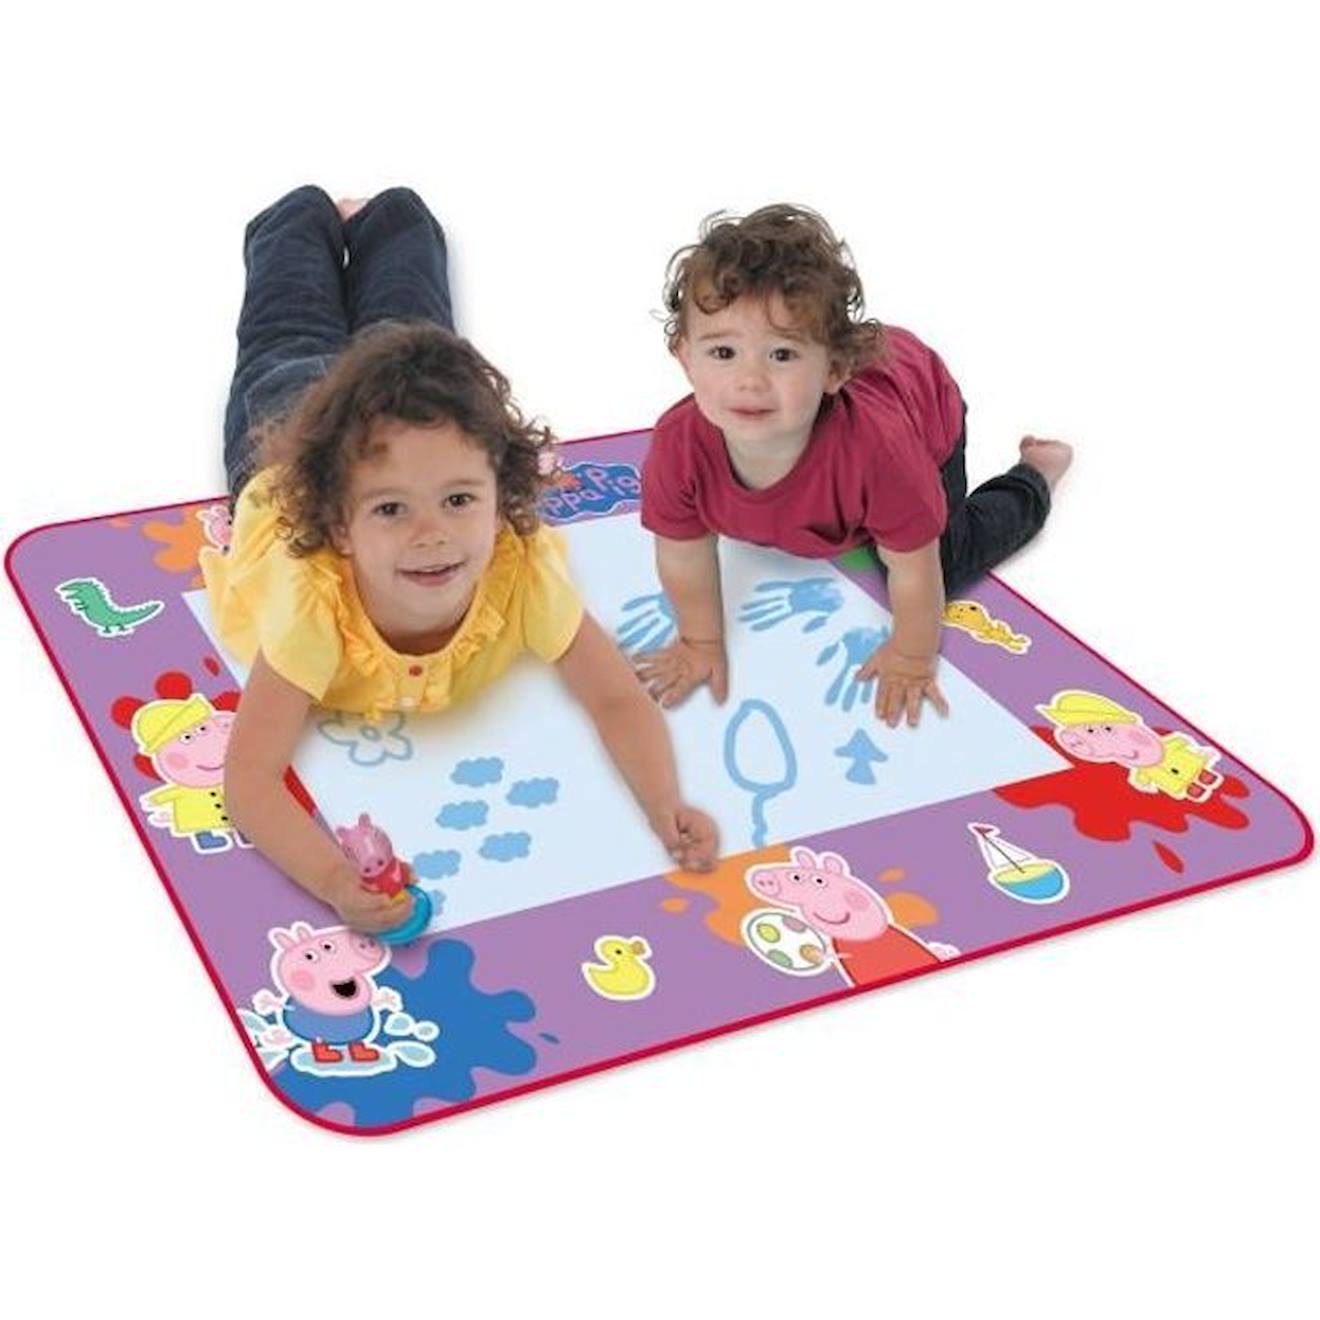 Tapis Aquadoodle Peppa Pig - Marque Tomy - Licence Peppa Pig - Pour Enfant Fille - Multicolore Rose